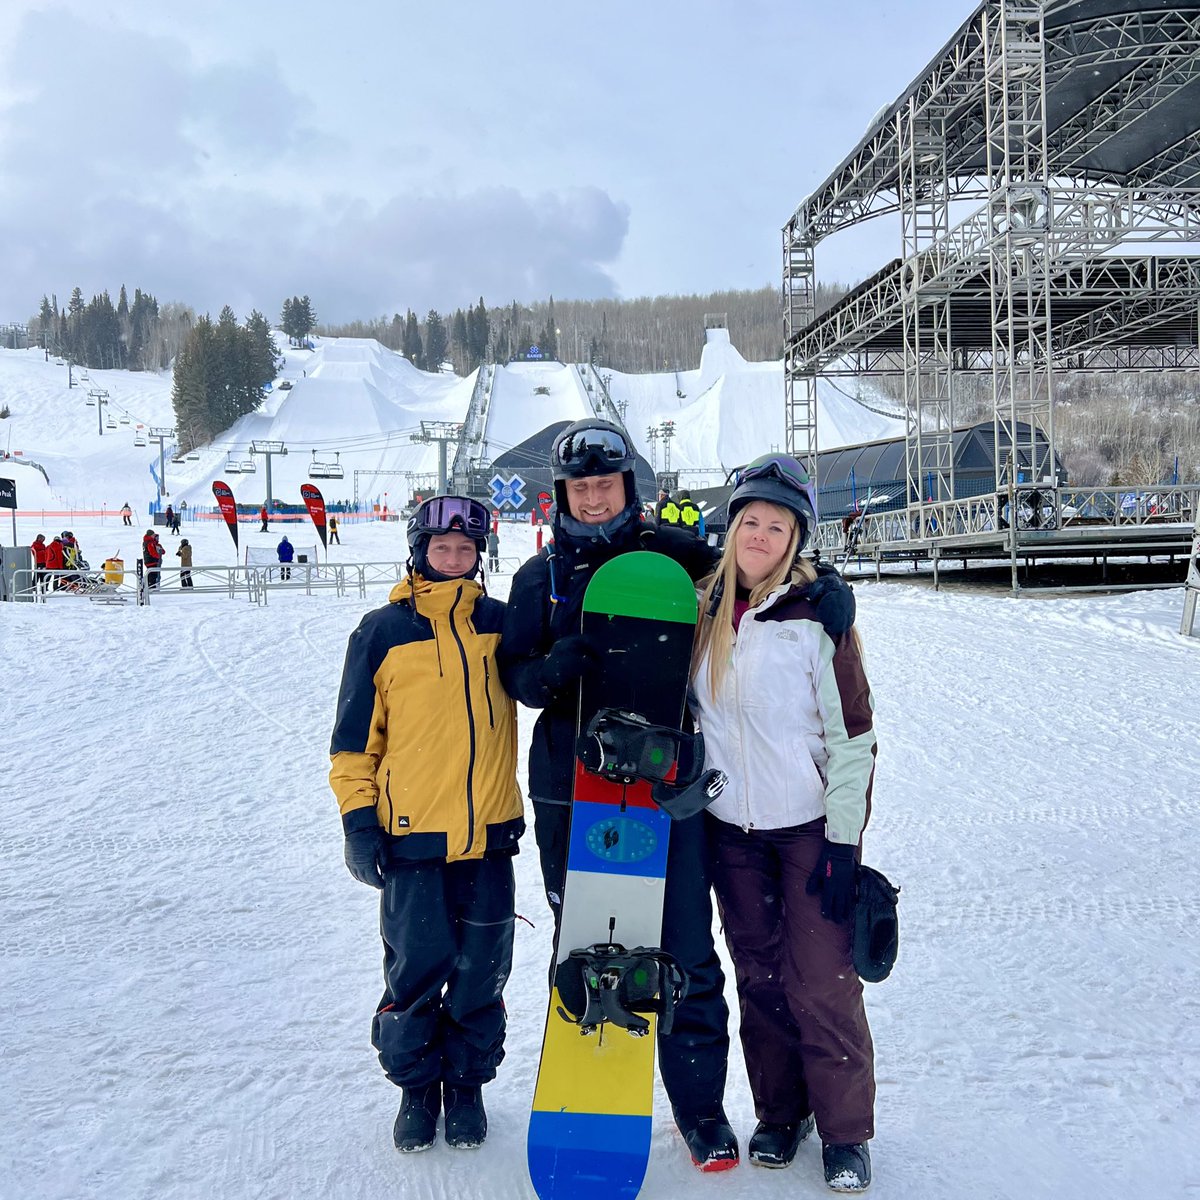 Our #RideWithRed winner, Charlie from North Carolina, has made it to Aspen, CO 🏔️ Ready to shred with @redgerard 🏂🥇